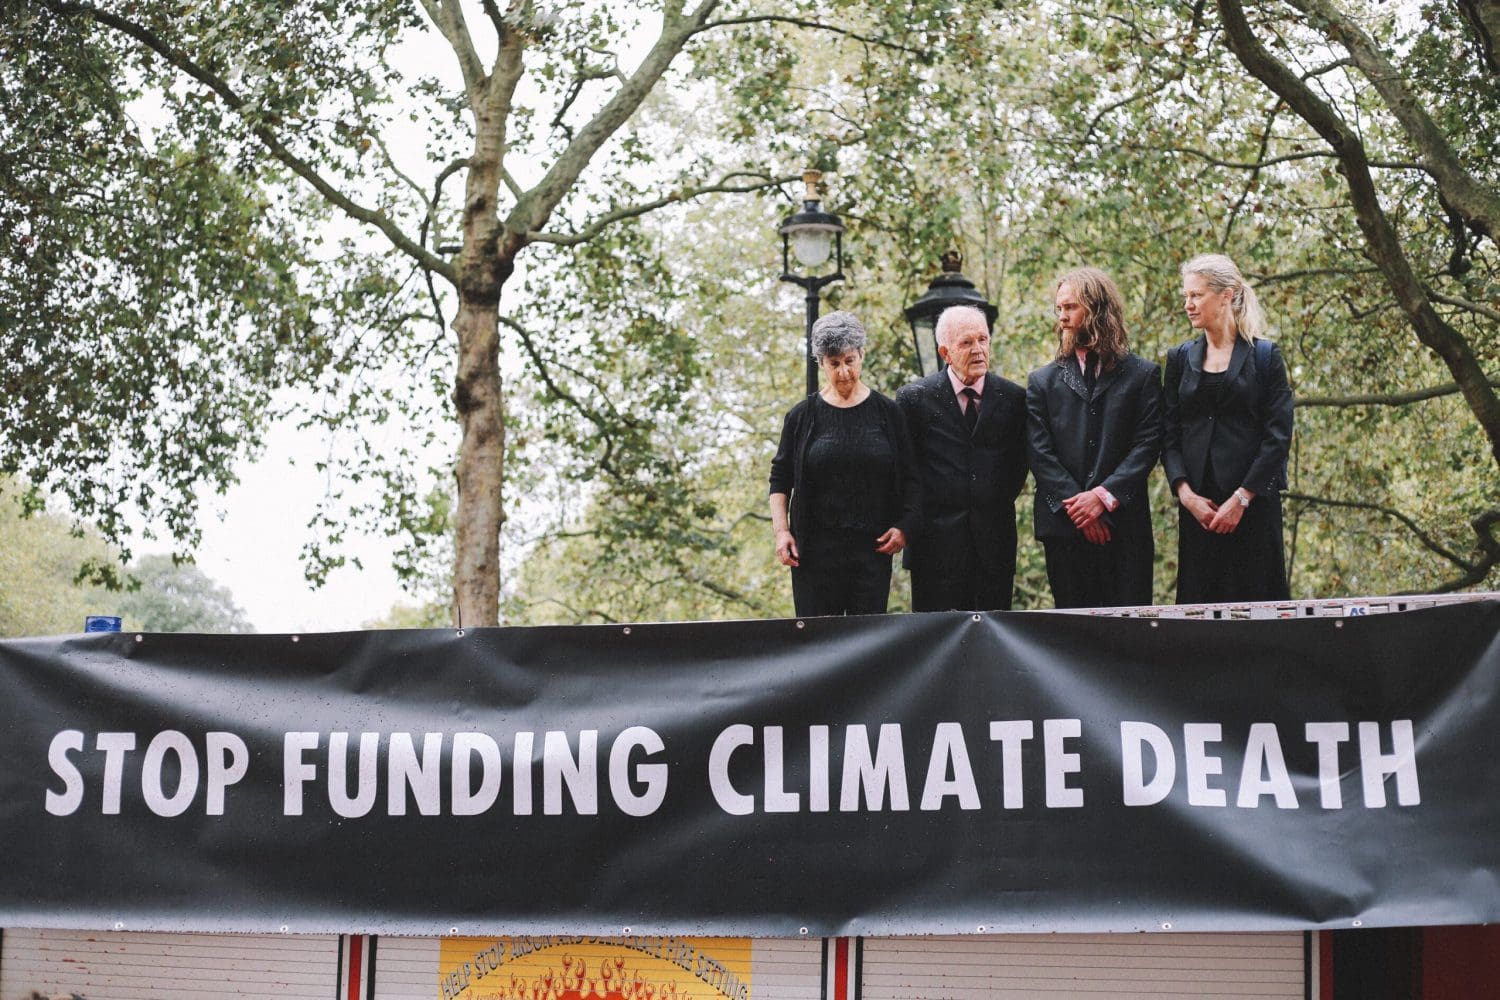 Banner reading "STOP FUNDING CLIMATE DEATH"